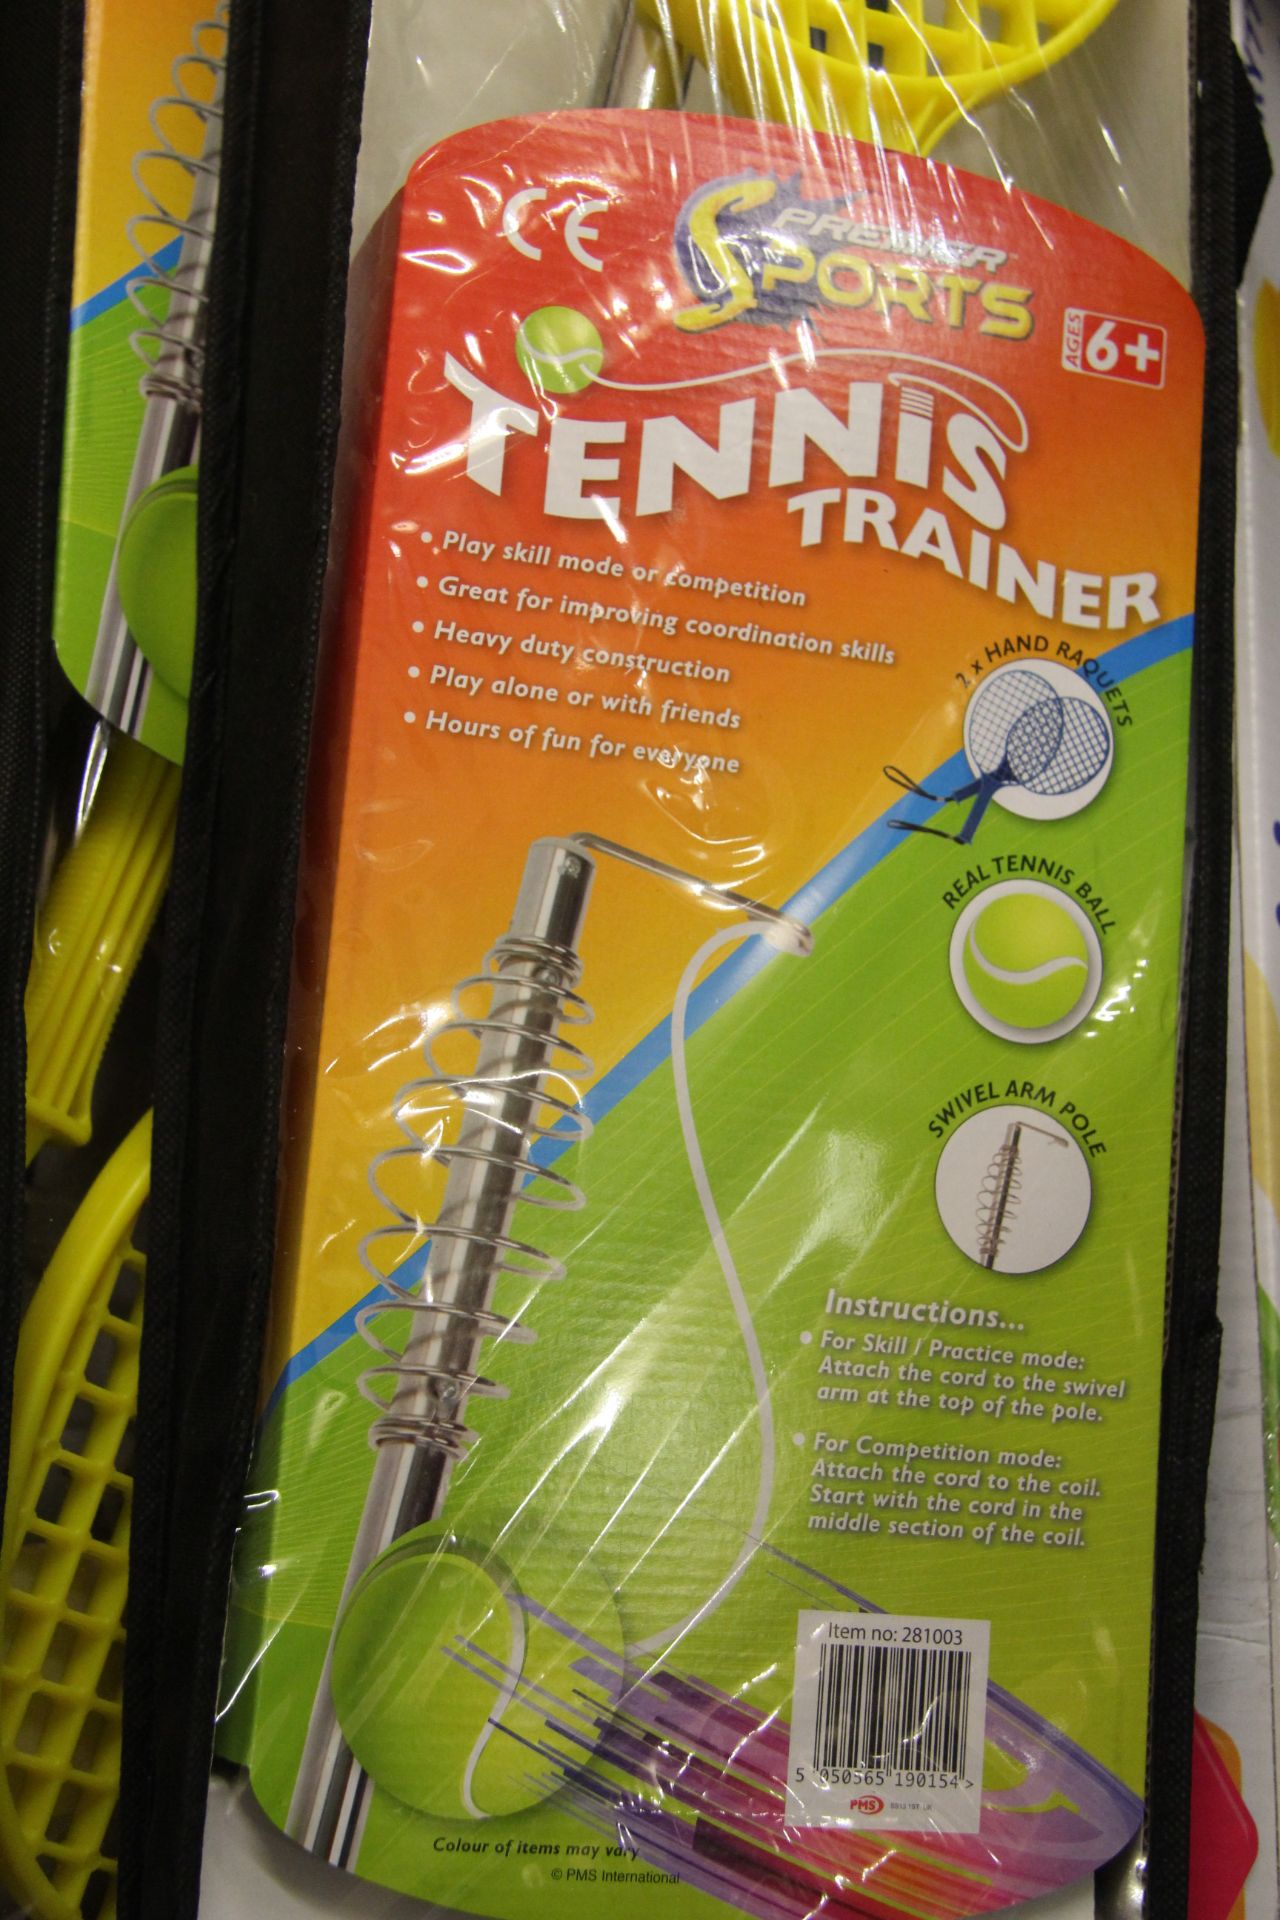 V Brand New Tennis Trainer Set w/Ball and 2 bats in carry bag